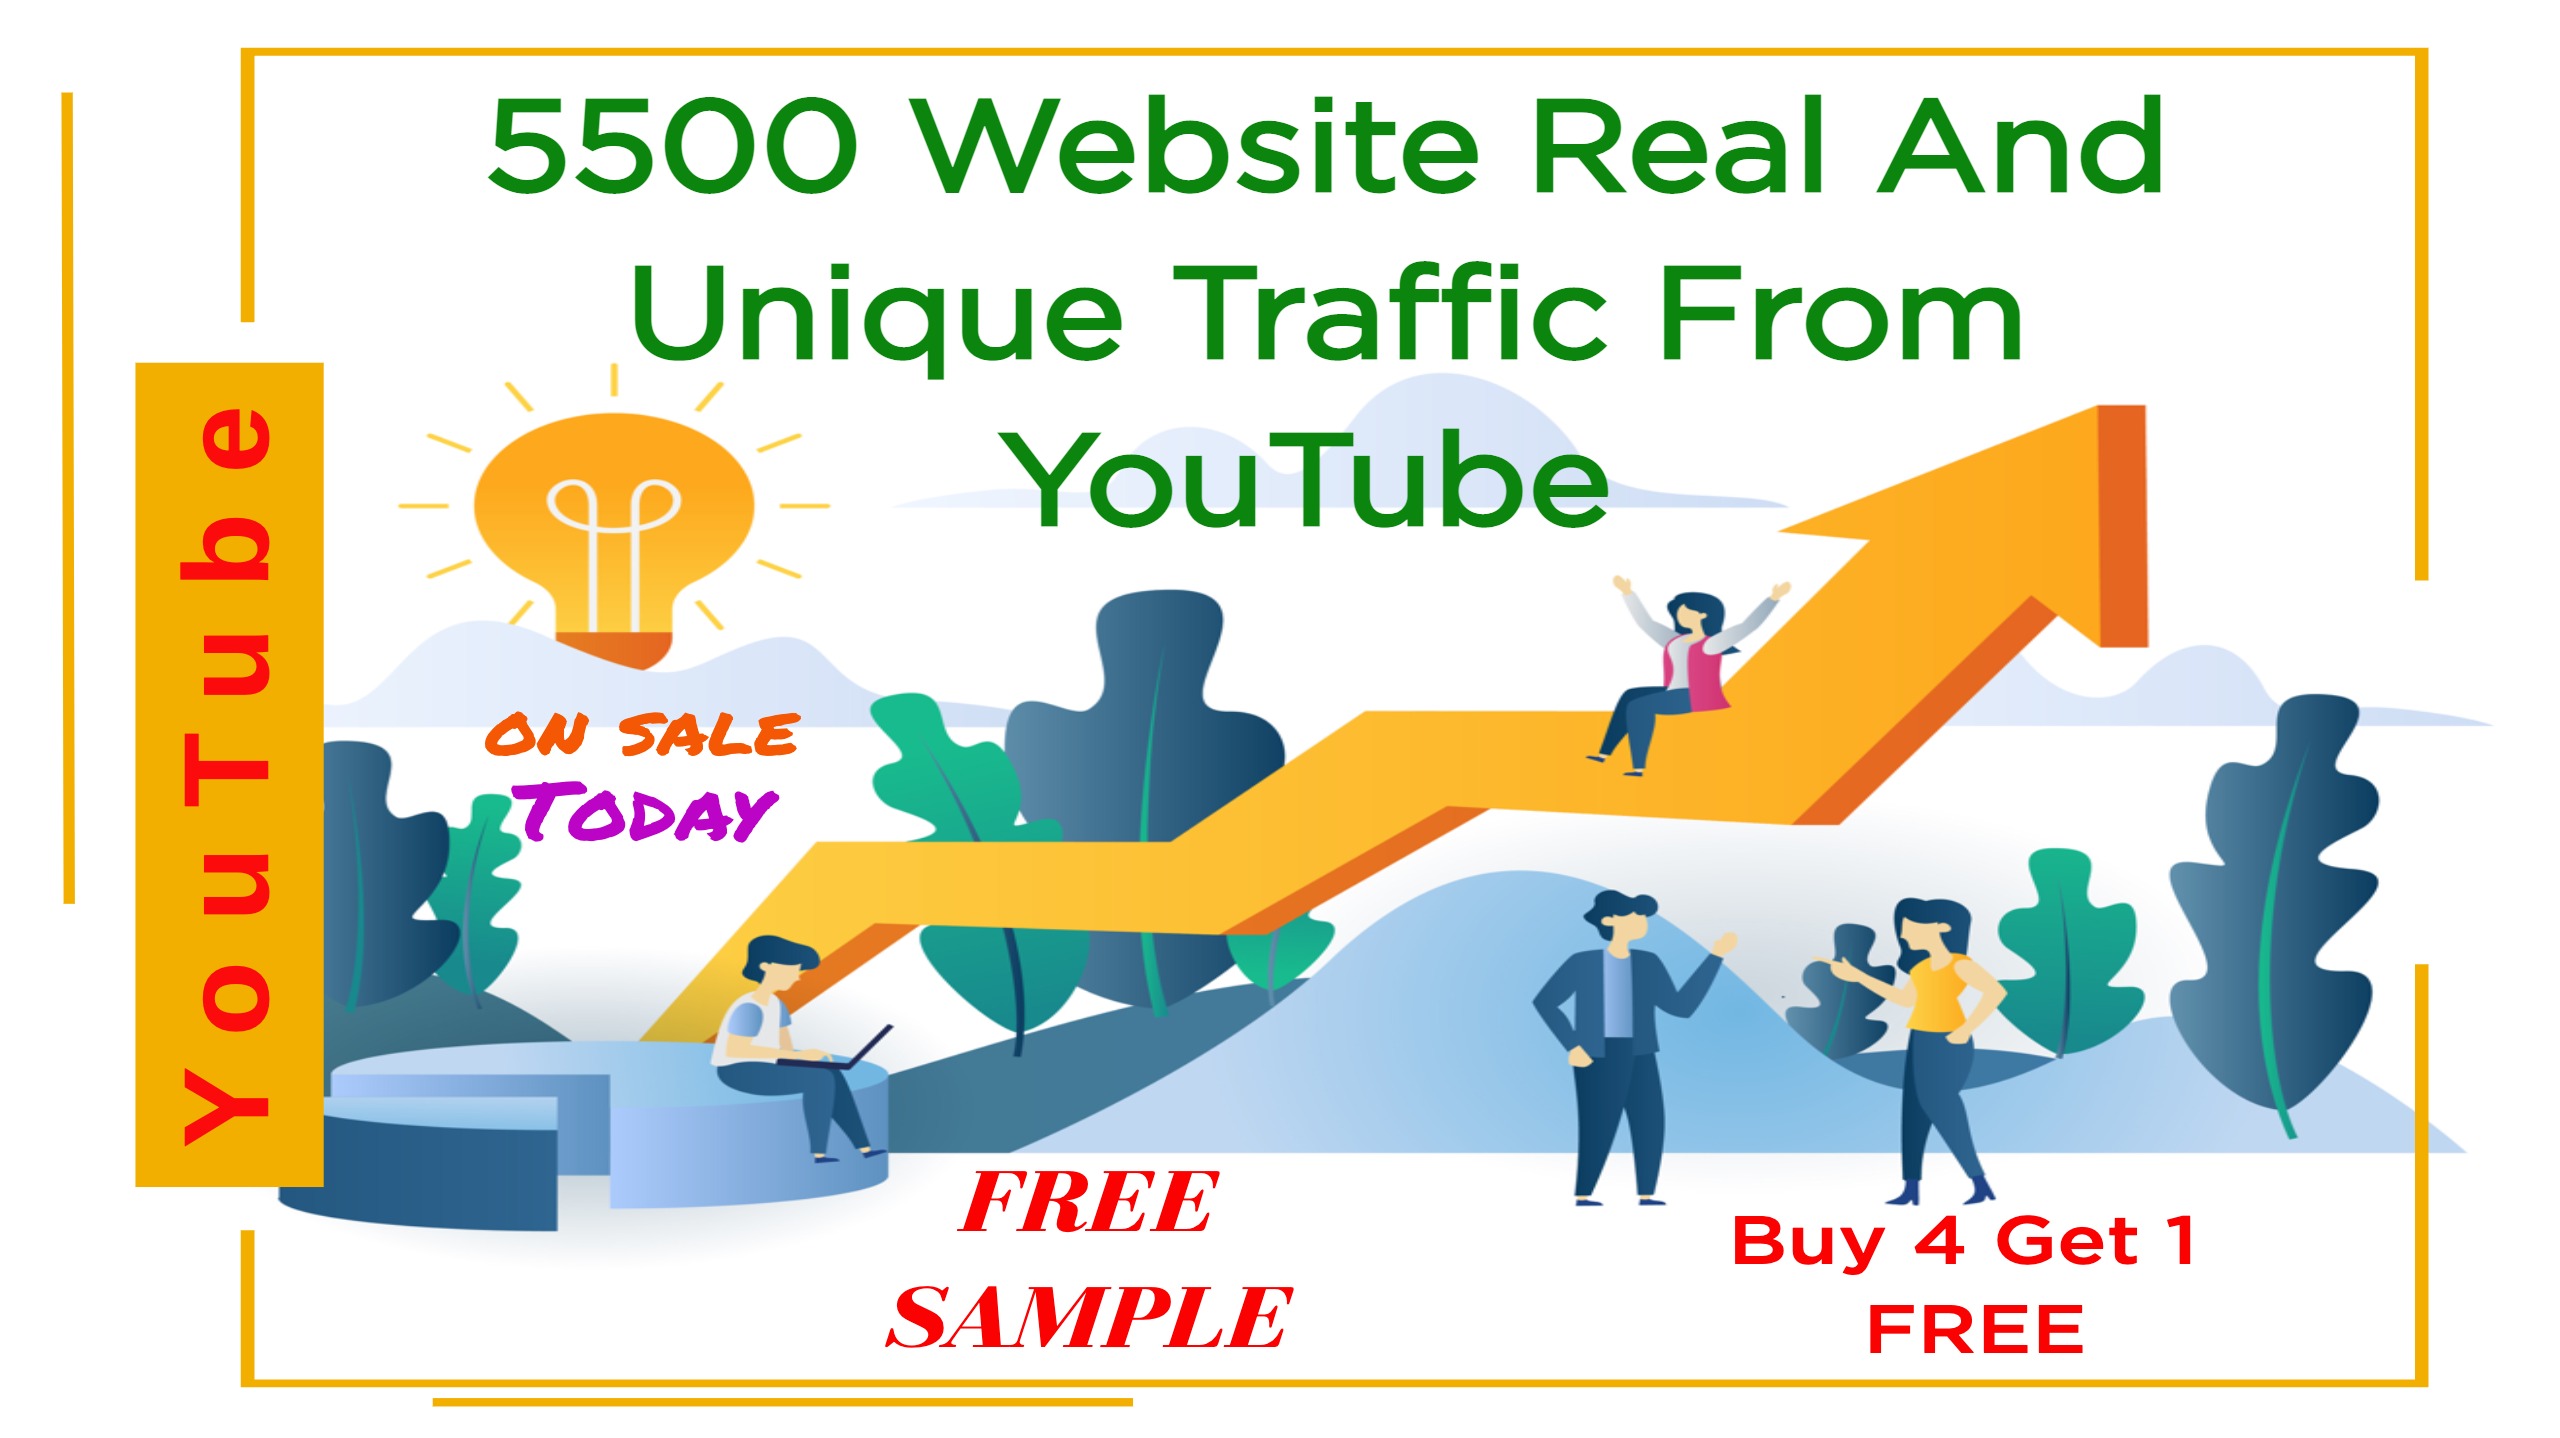 5500 Website Real And Unique Traffic From YouTube 